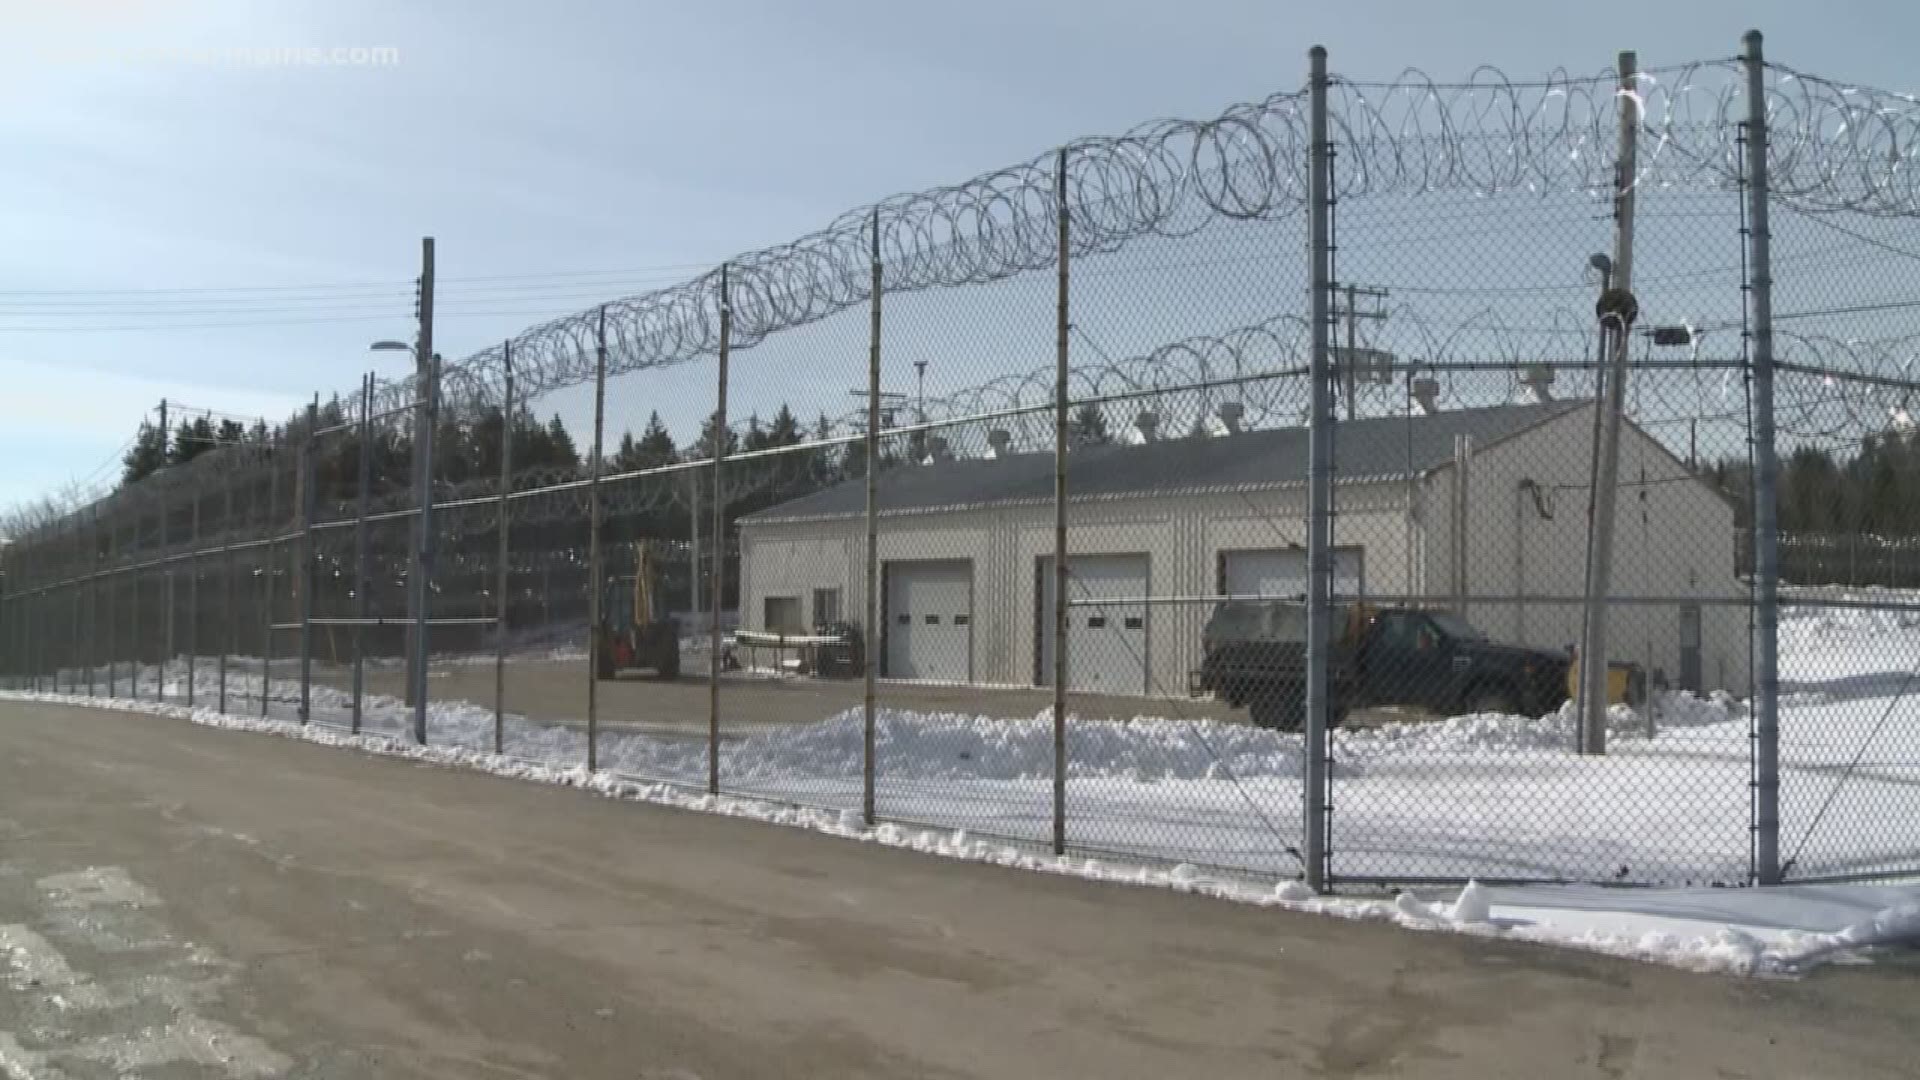 Replacement to be built for Downeast Correctional Facility, Mills says